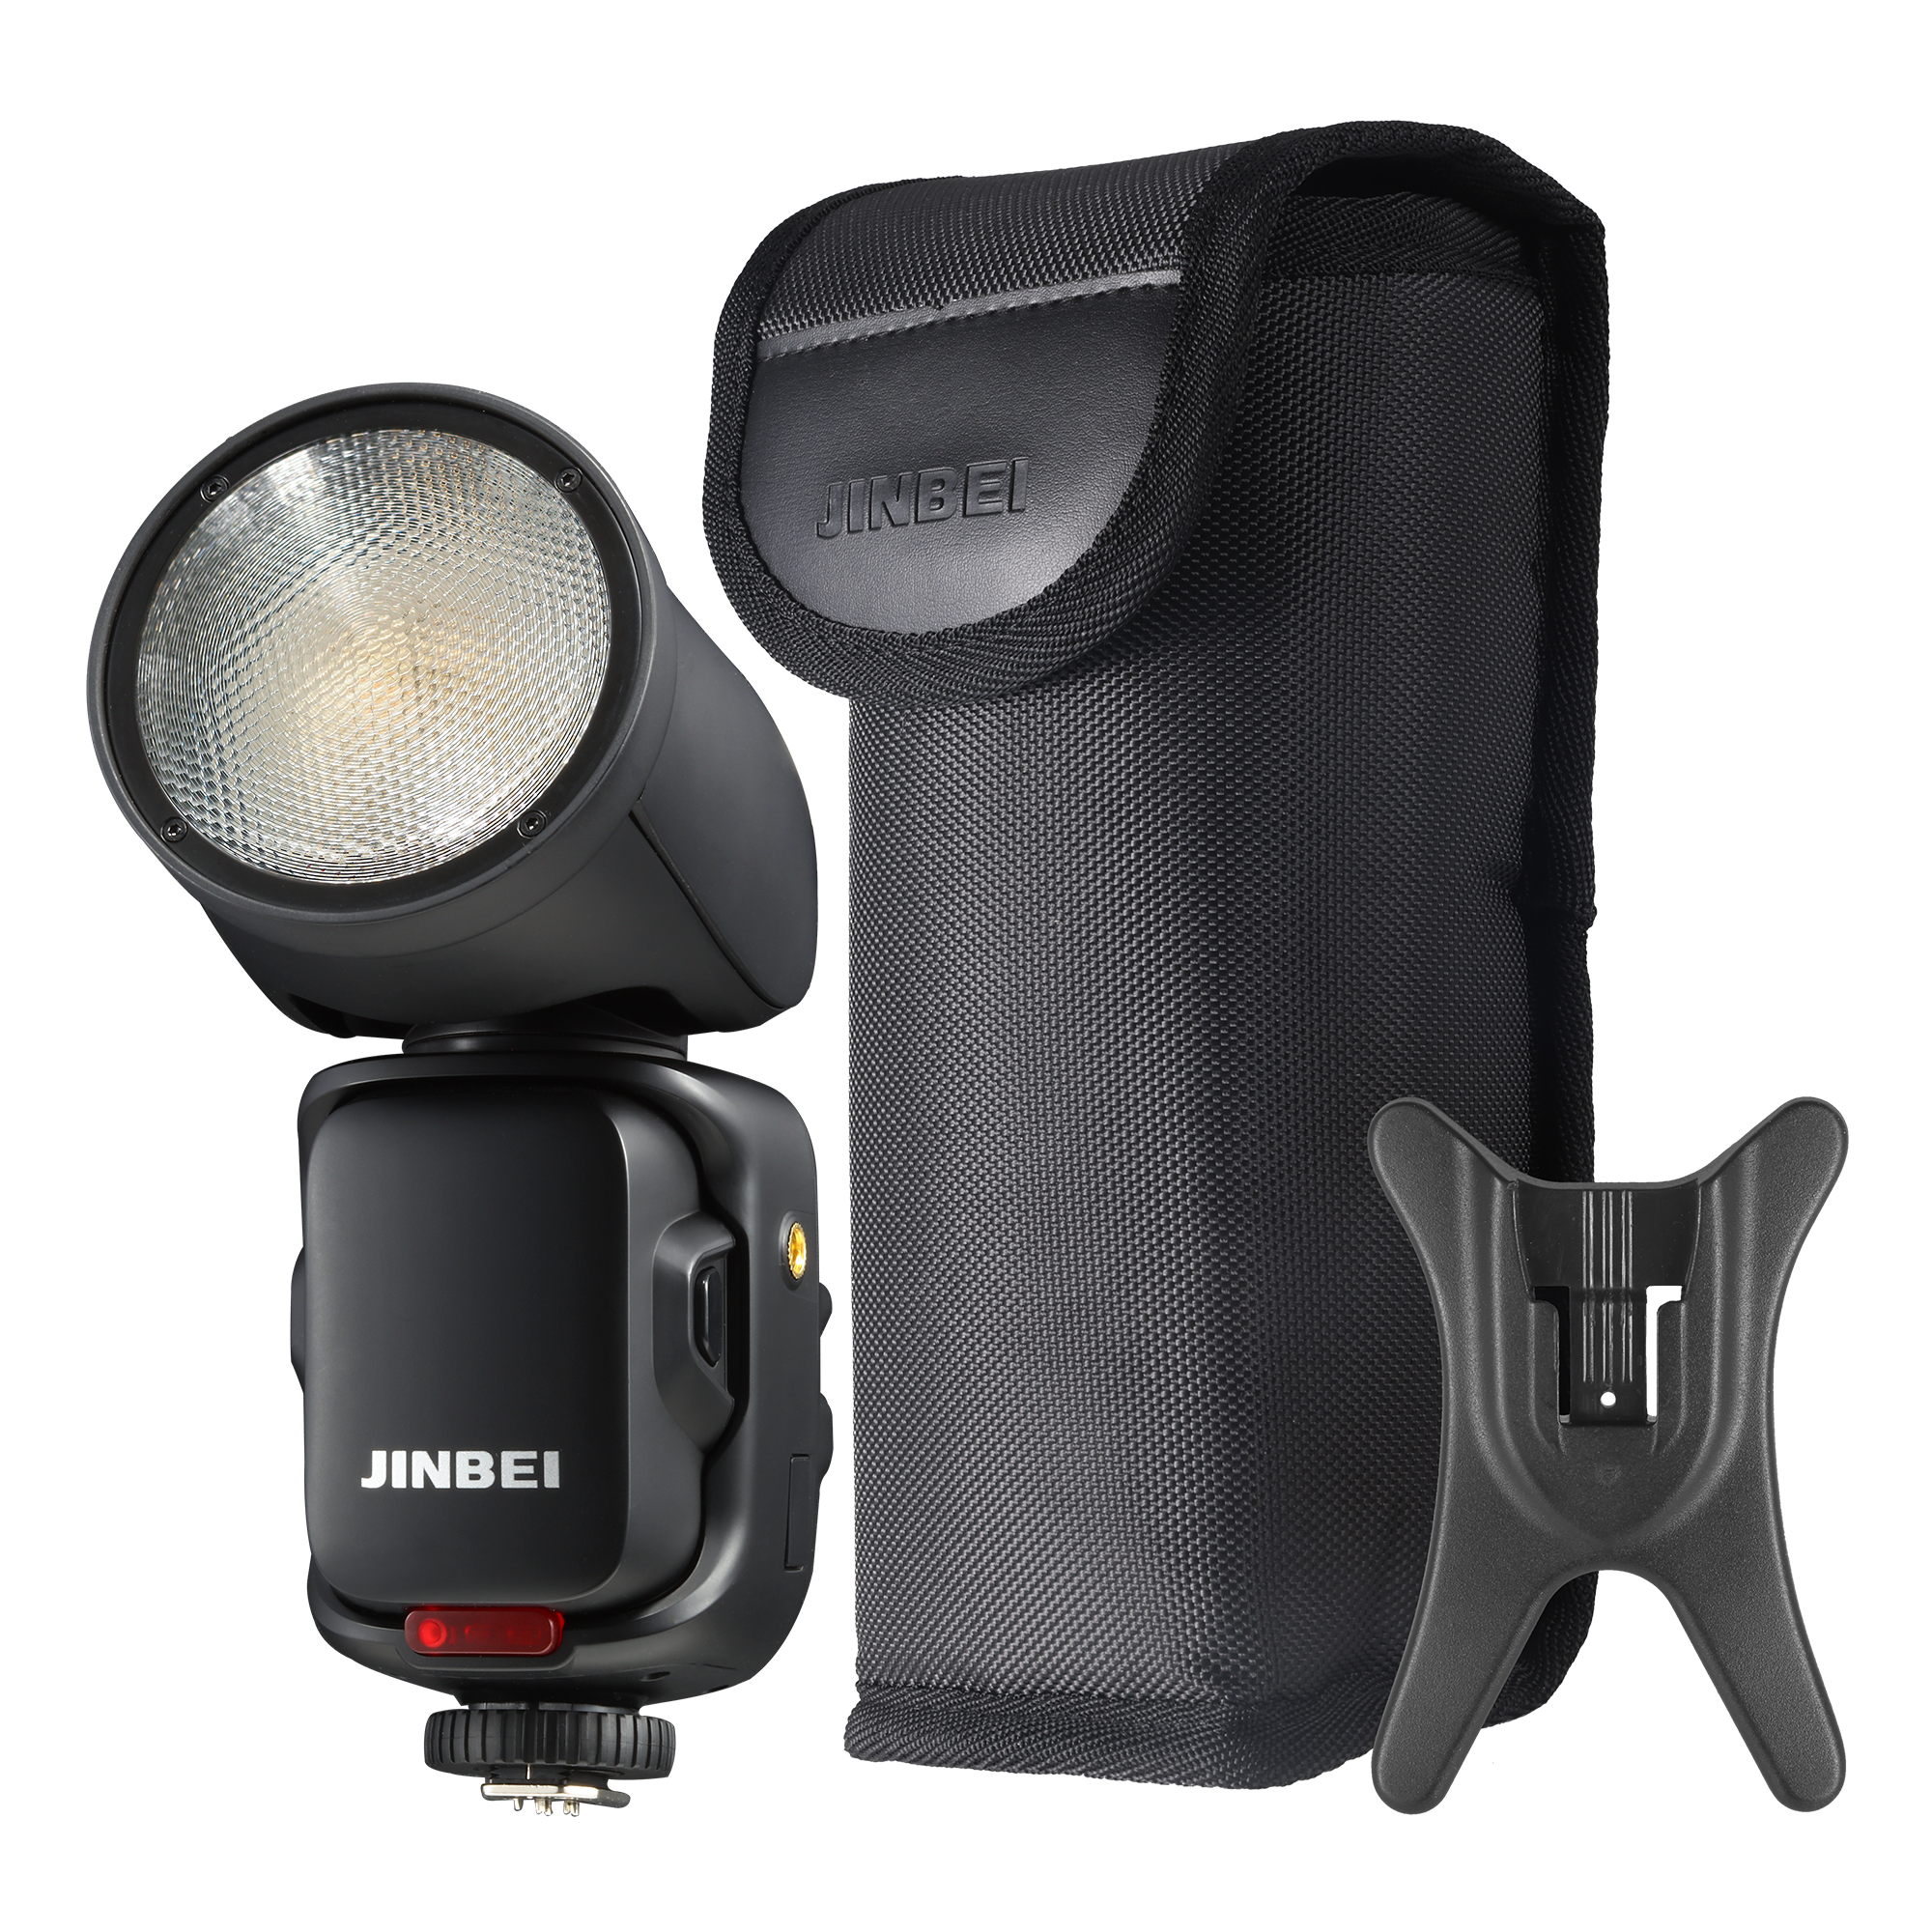 HD-2 Max clip-on flash with 80 watts of power from Jinbei